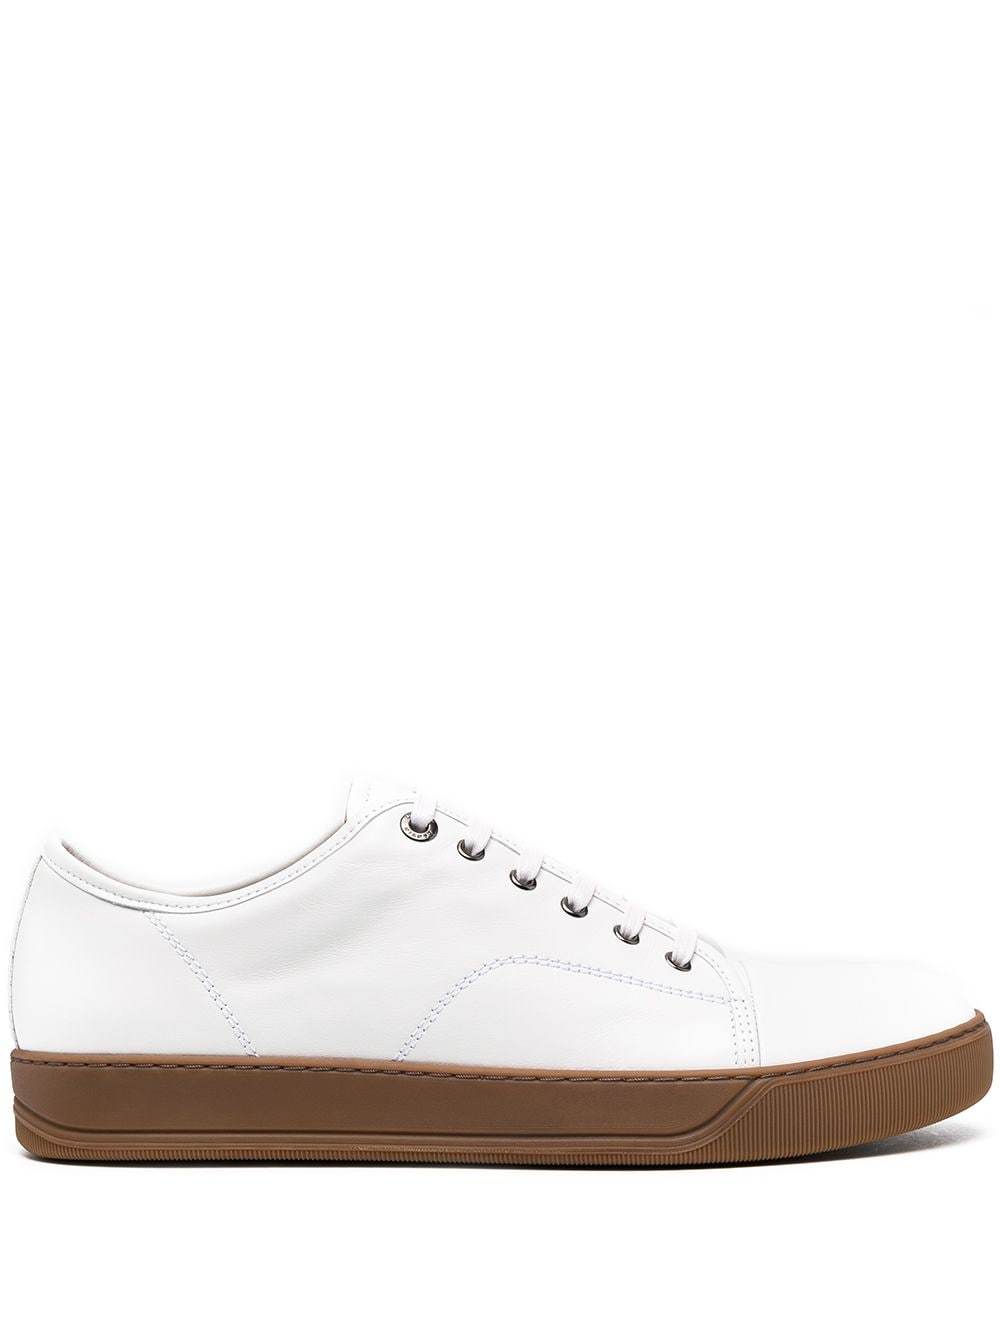 Lanvin Lace Up Leather Sneakers, $400 | farfetch.com | Lookastic